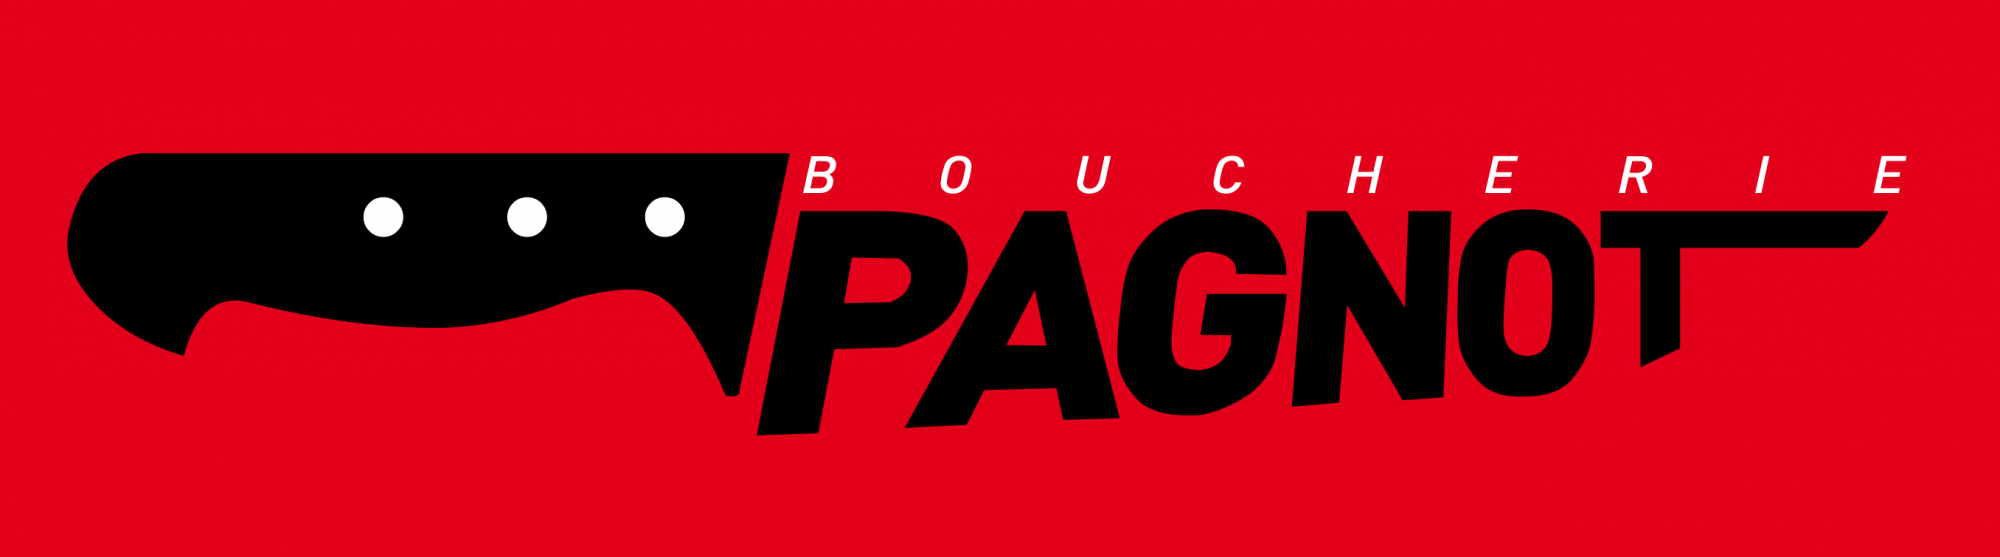 Boucherie Pagnot